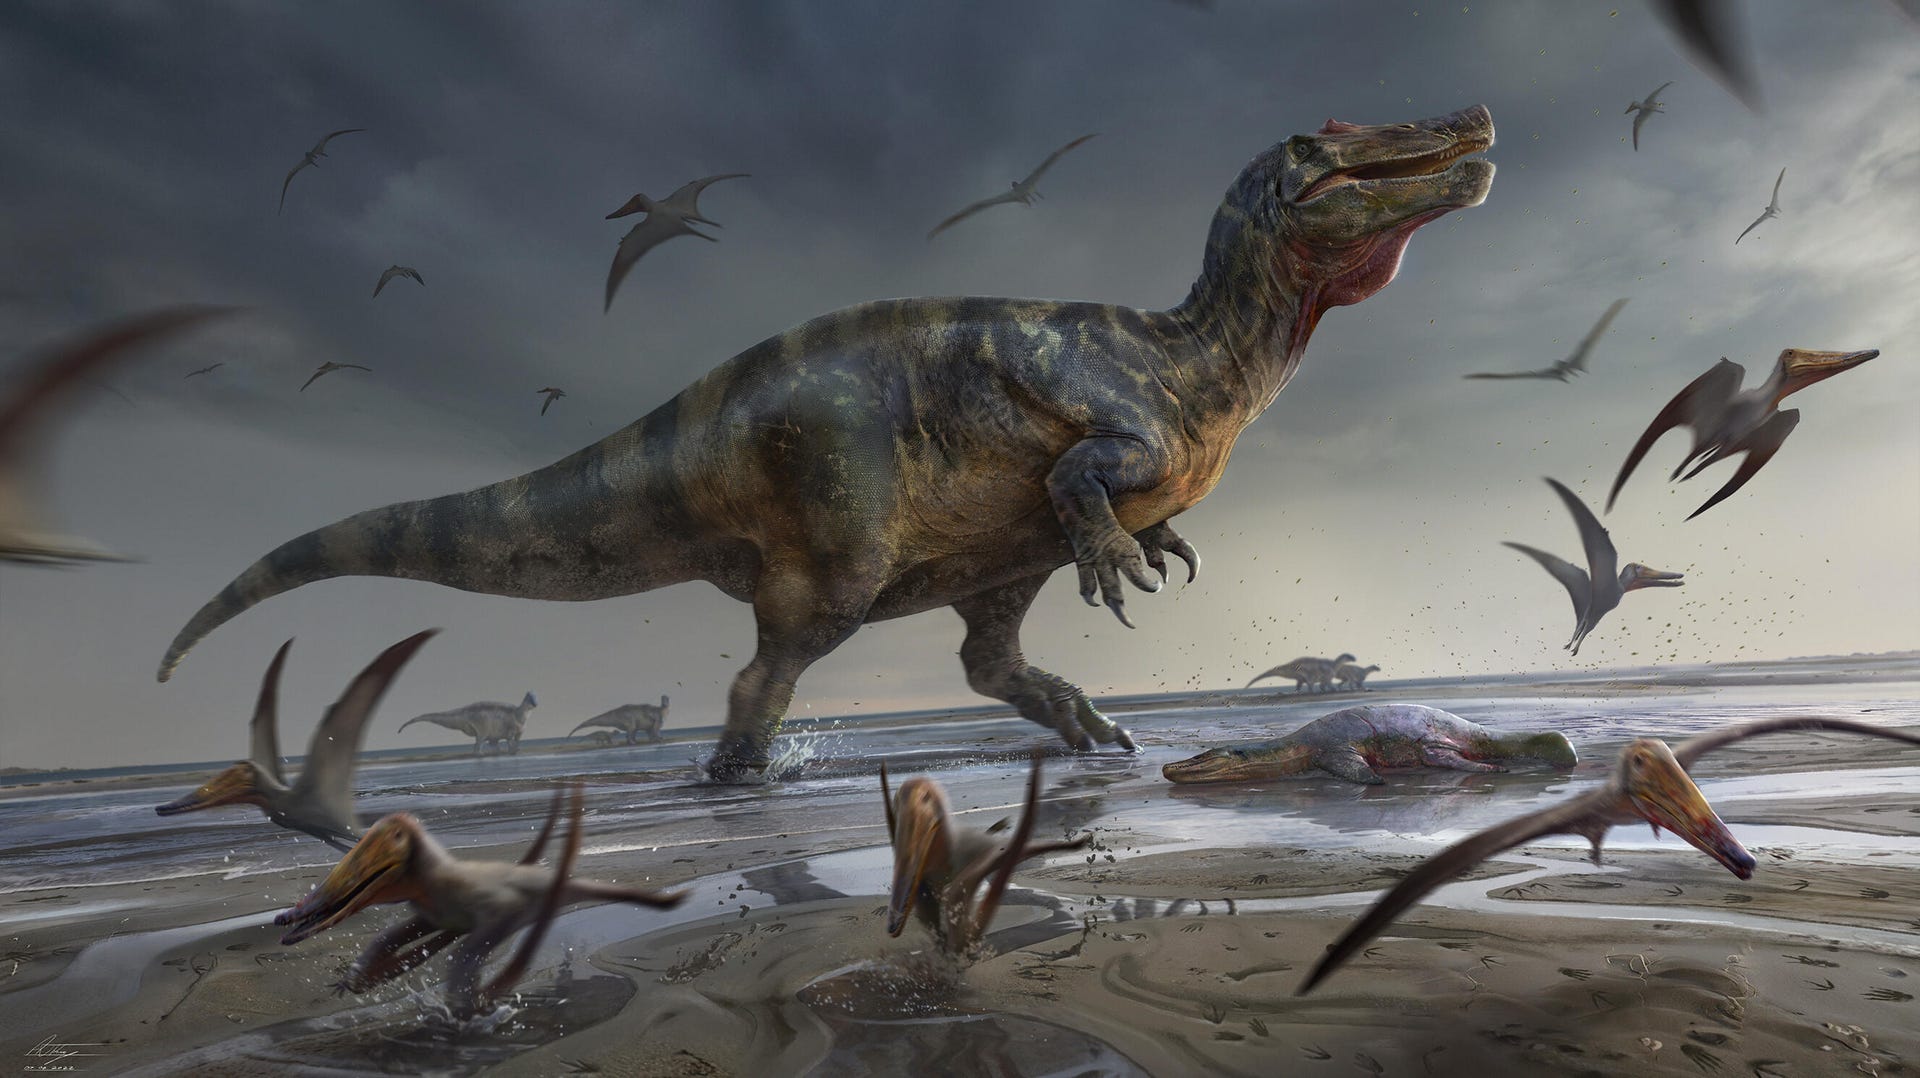 A large spinosaurid dinosaur walks through shallow water as flying dinosaurs scatter.